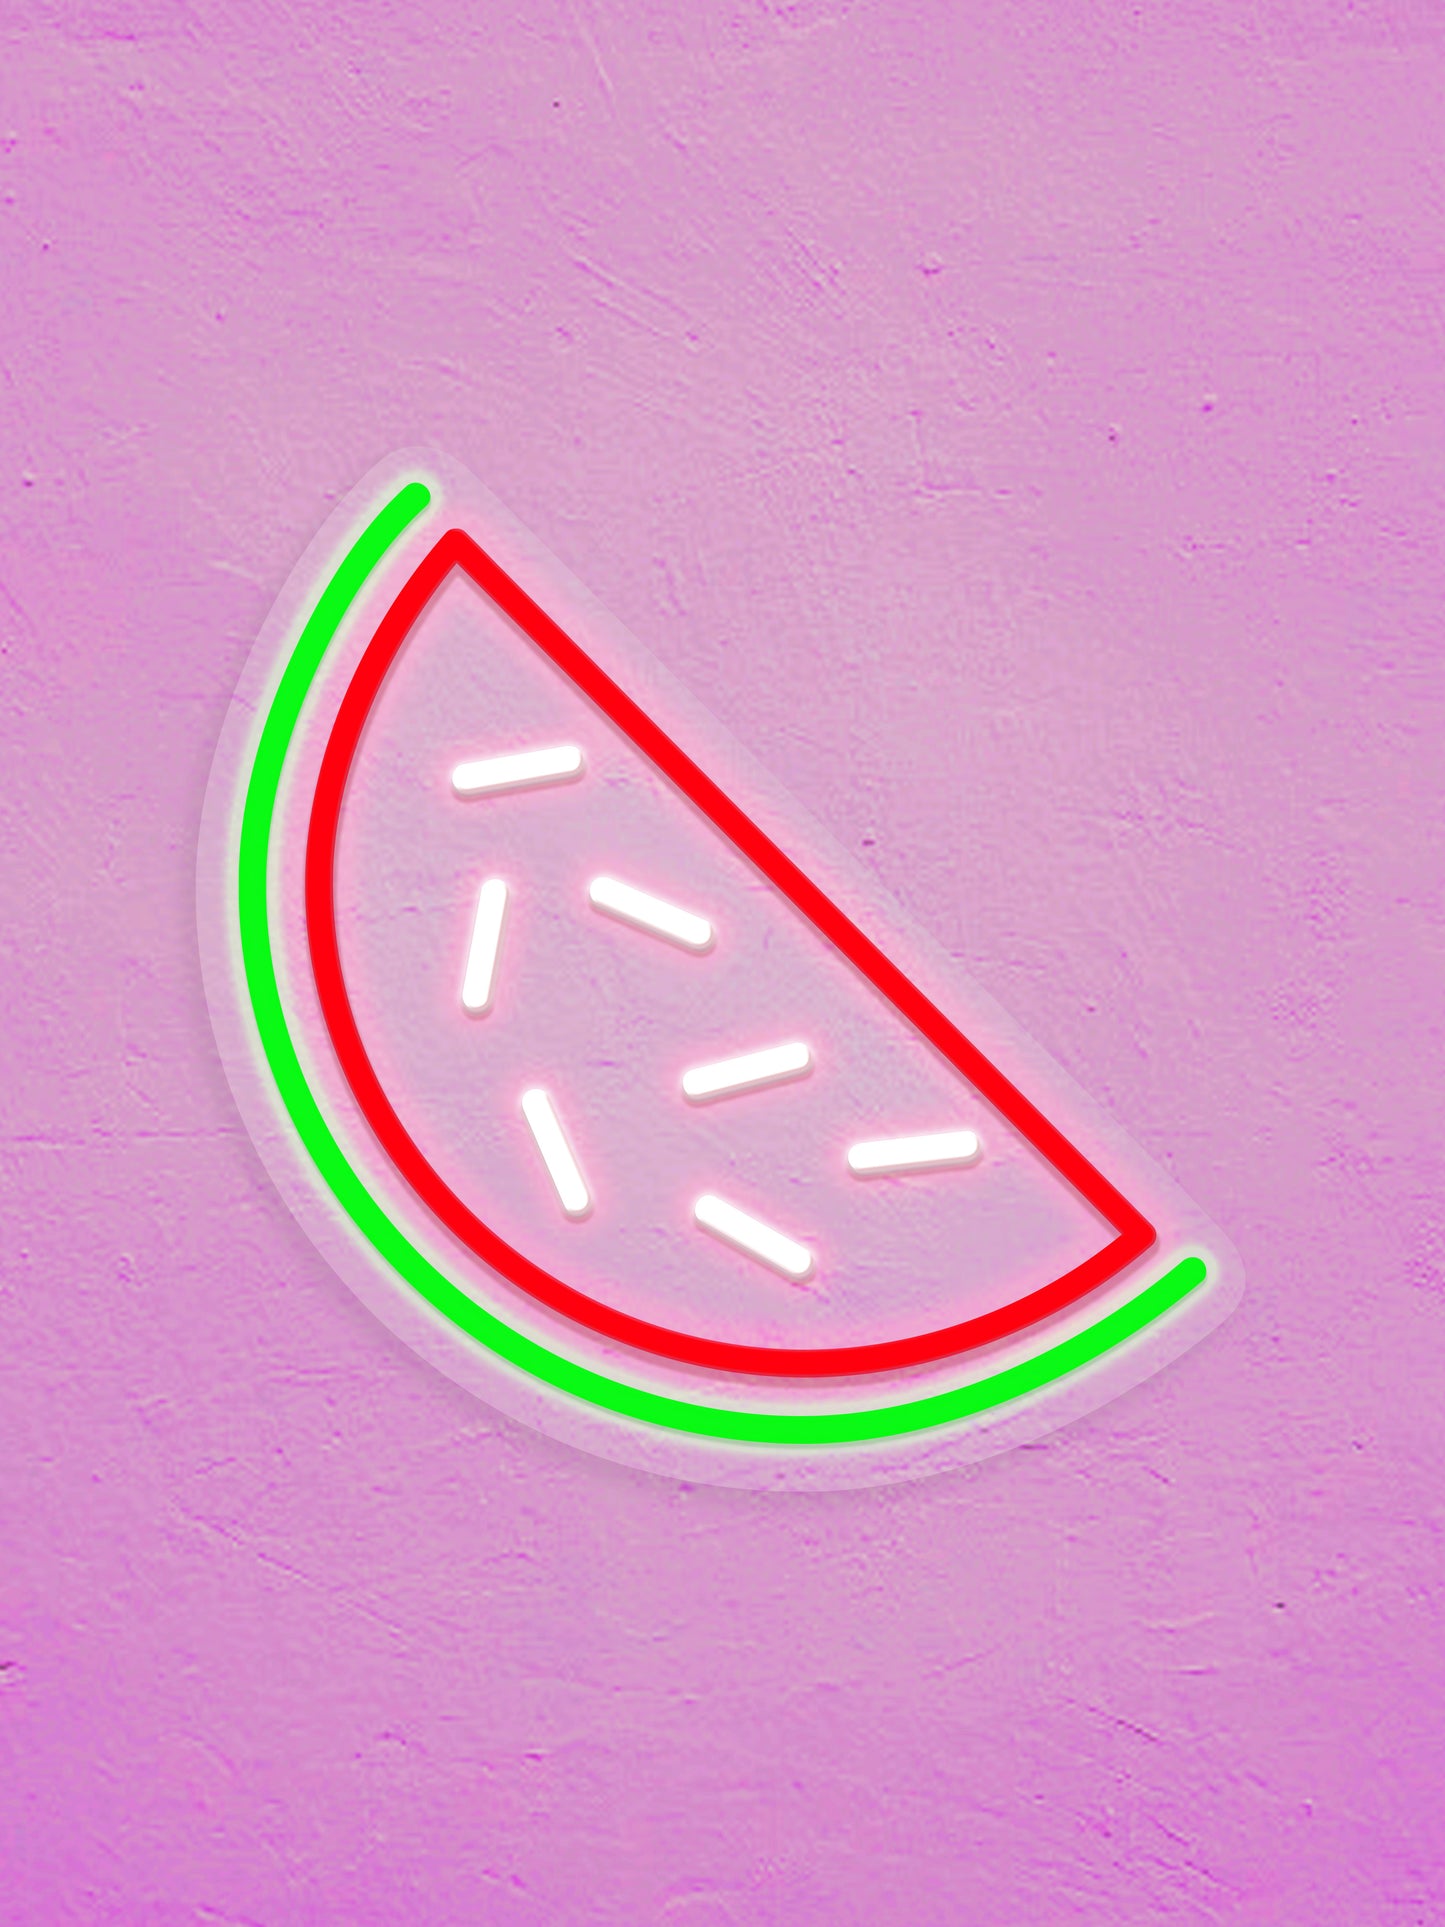 Load image into Gallery viewer, Watermelon
